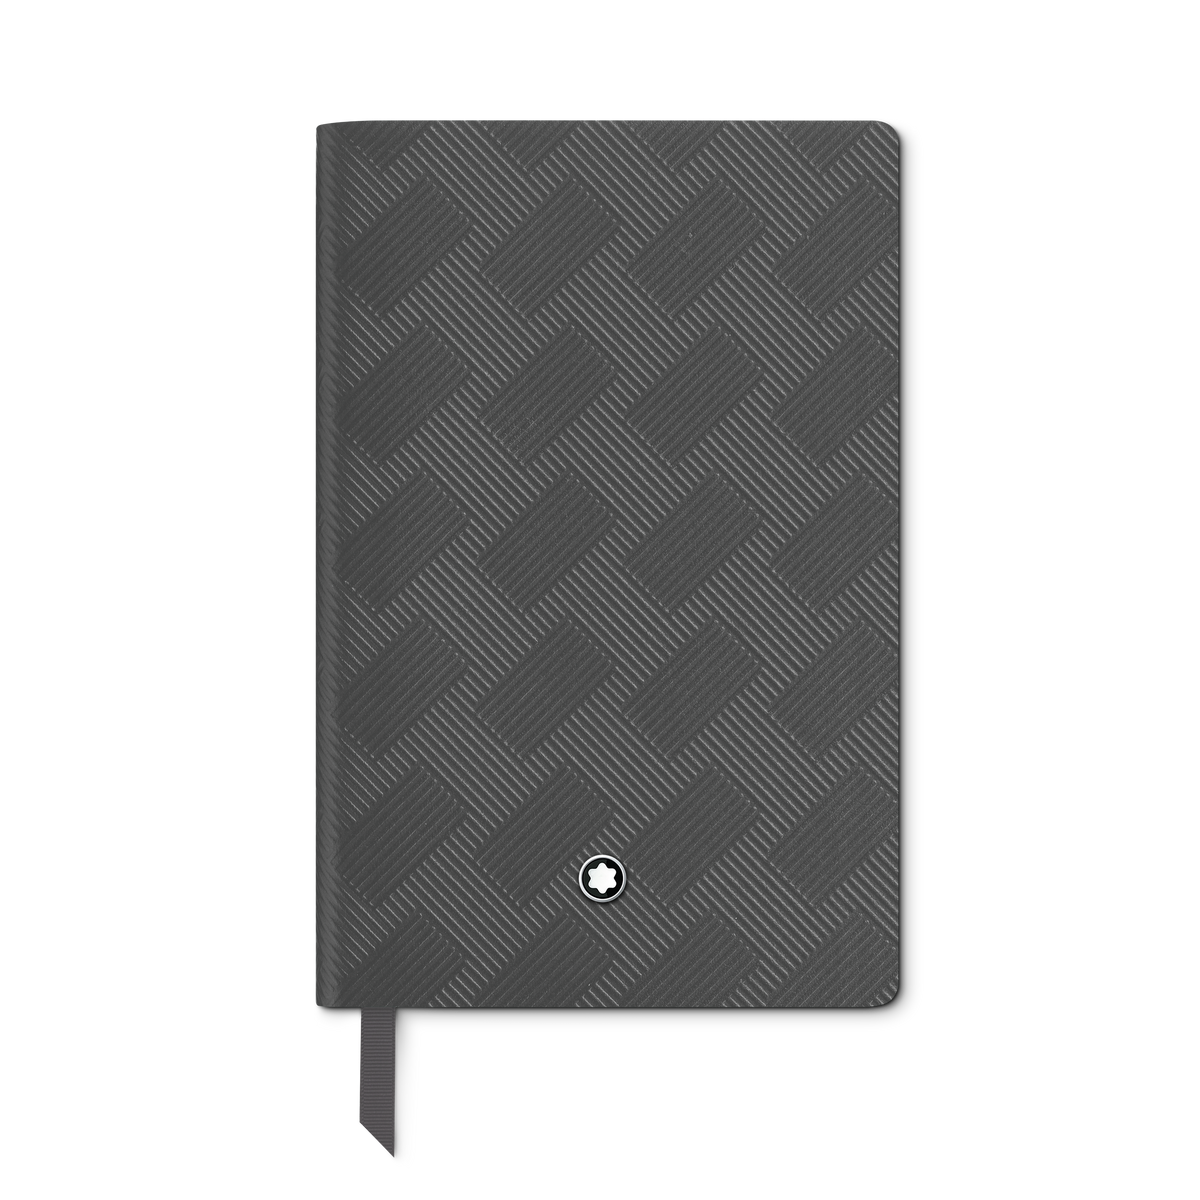 Pocket Notebook #148, Montblanc Extreme 3.0 Collection, gray lined